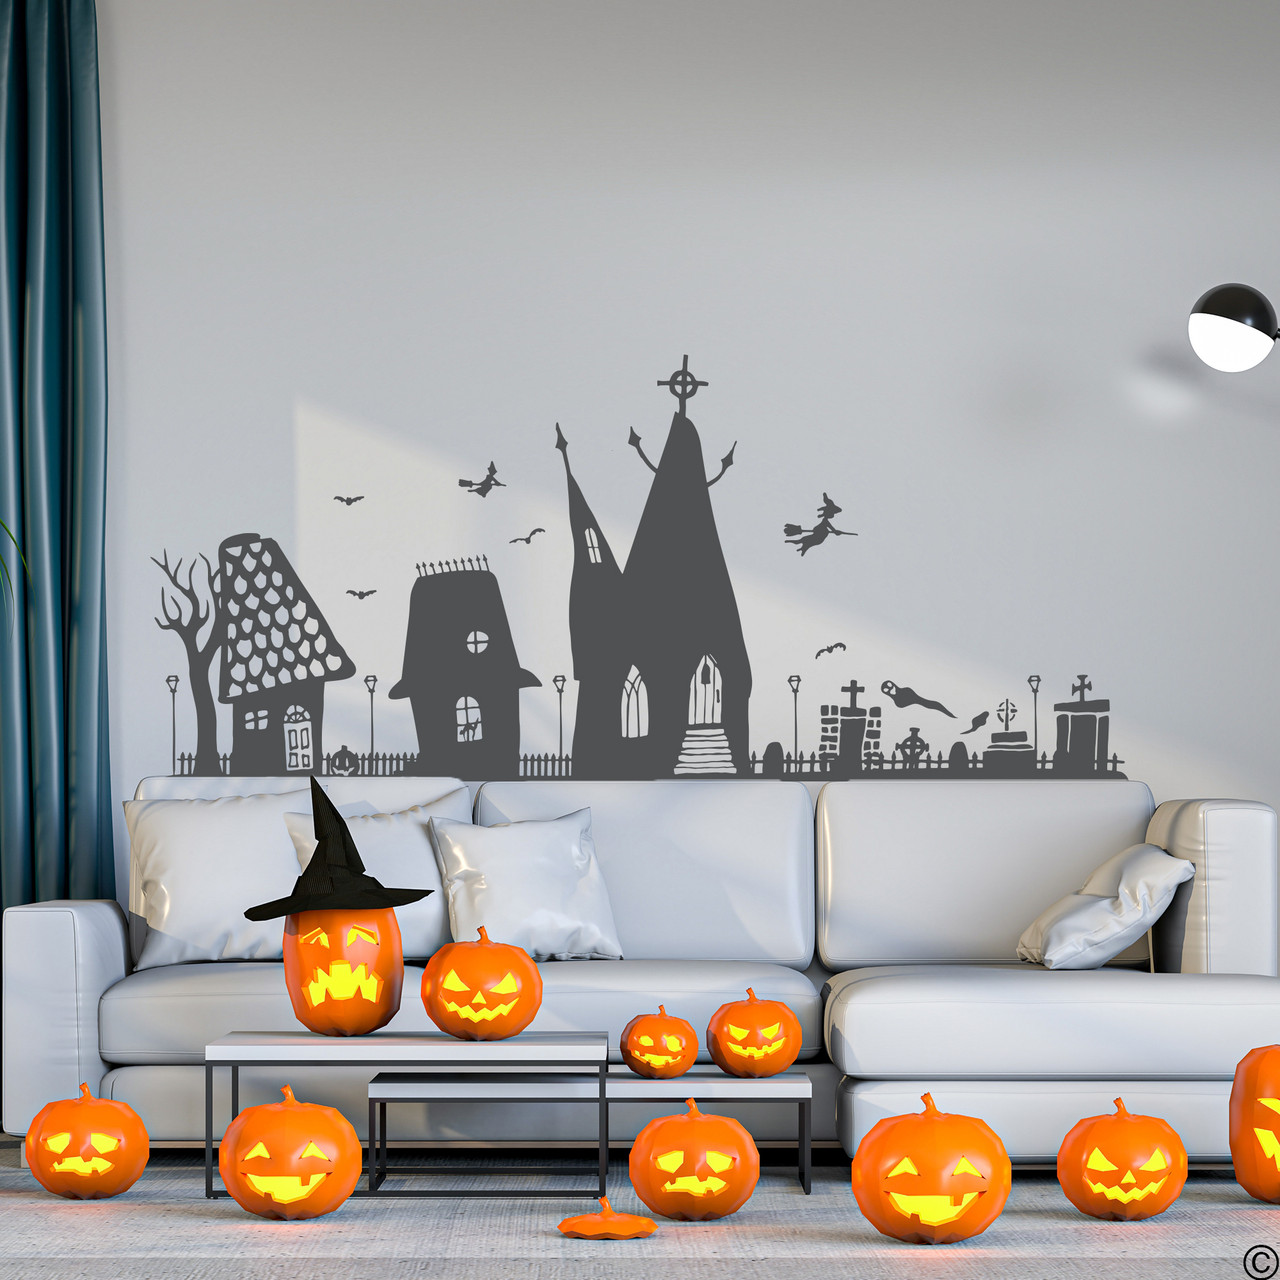 The Halloween houses wall decal in dark grey vinyl color.